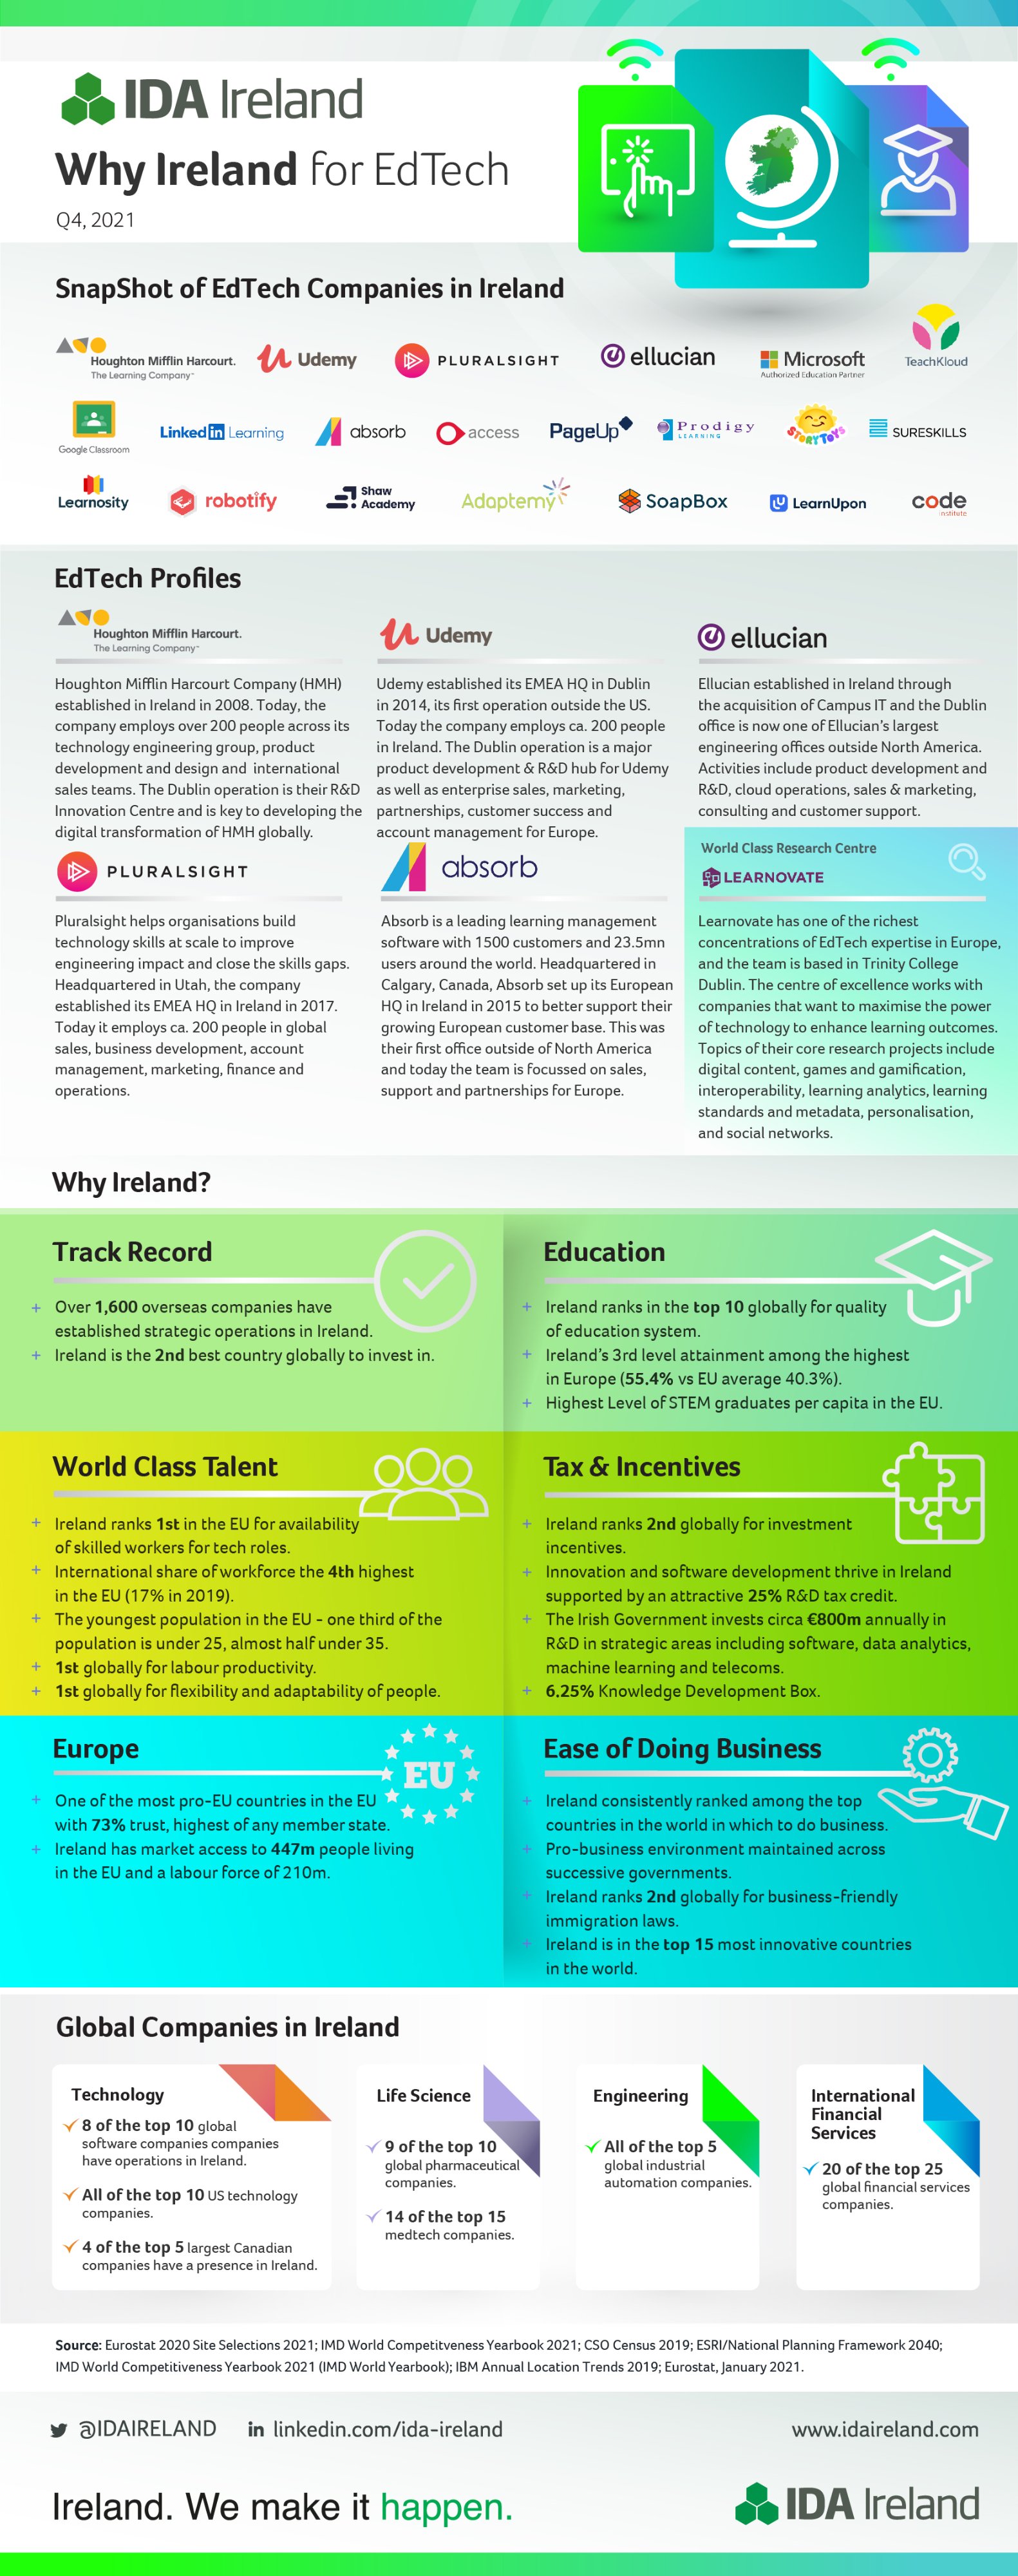 Why Ireland for EdTech